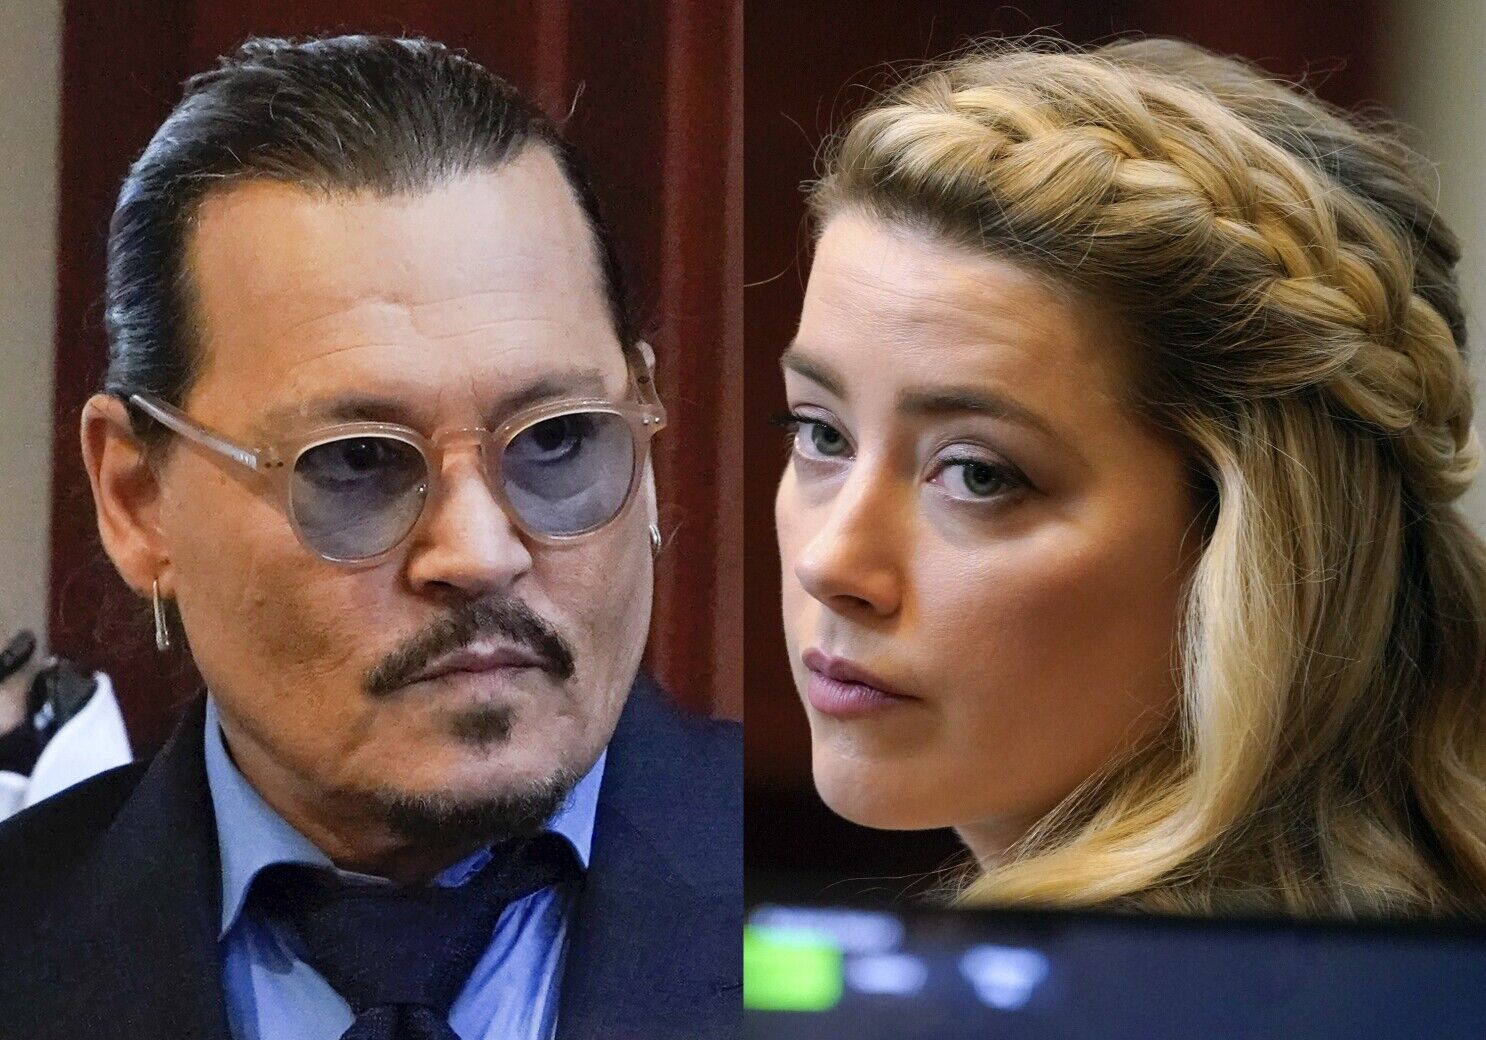 Amber Heard cant afford to pay $10 million to Johnny Depp: Lawyer